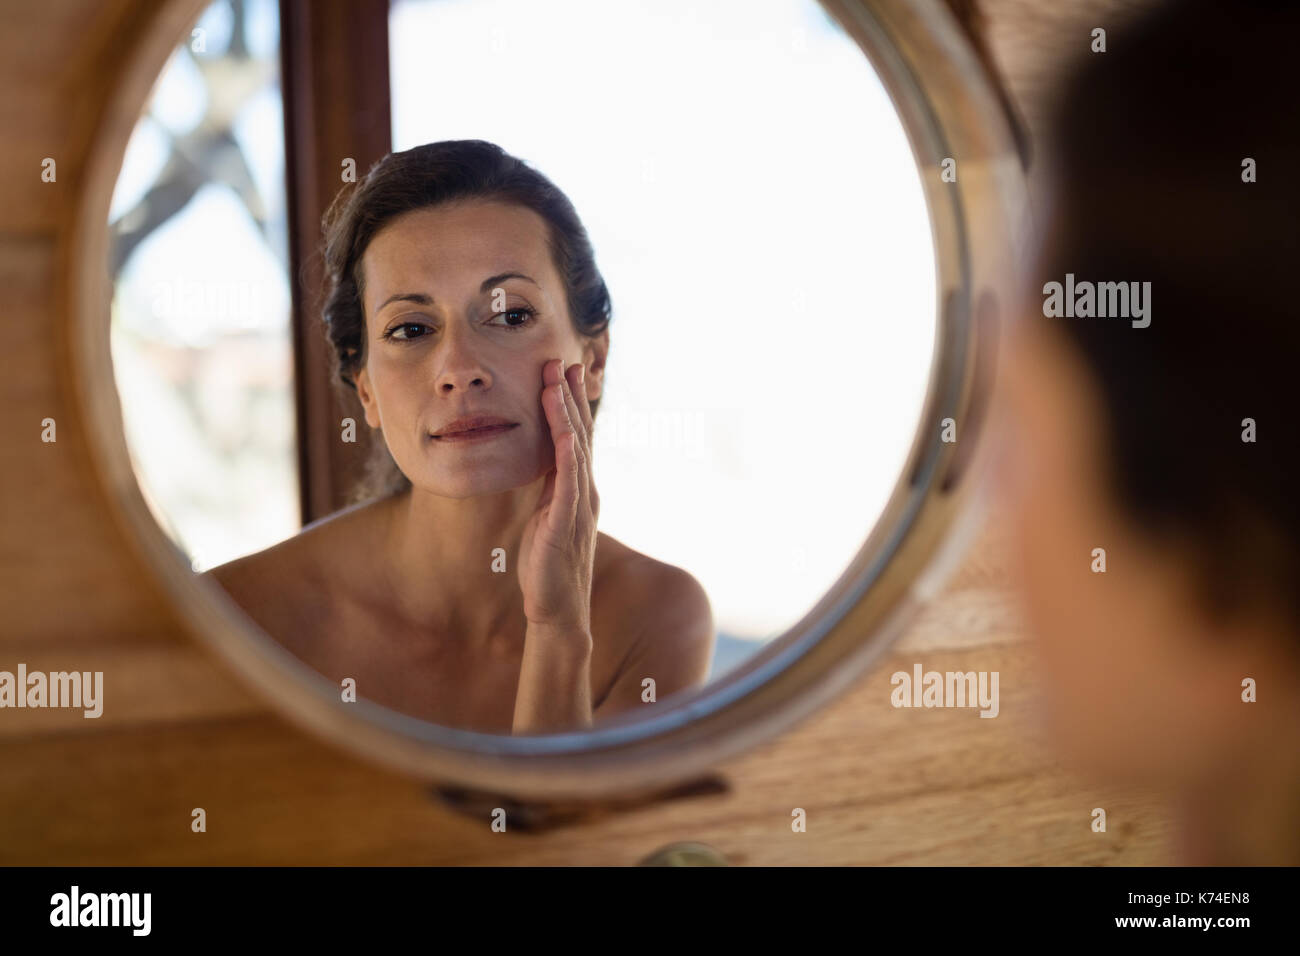 Woman looking at mirror in cottage during safari vacation Stock Photo